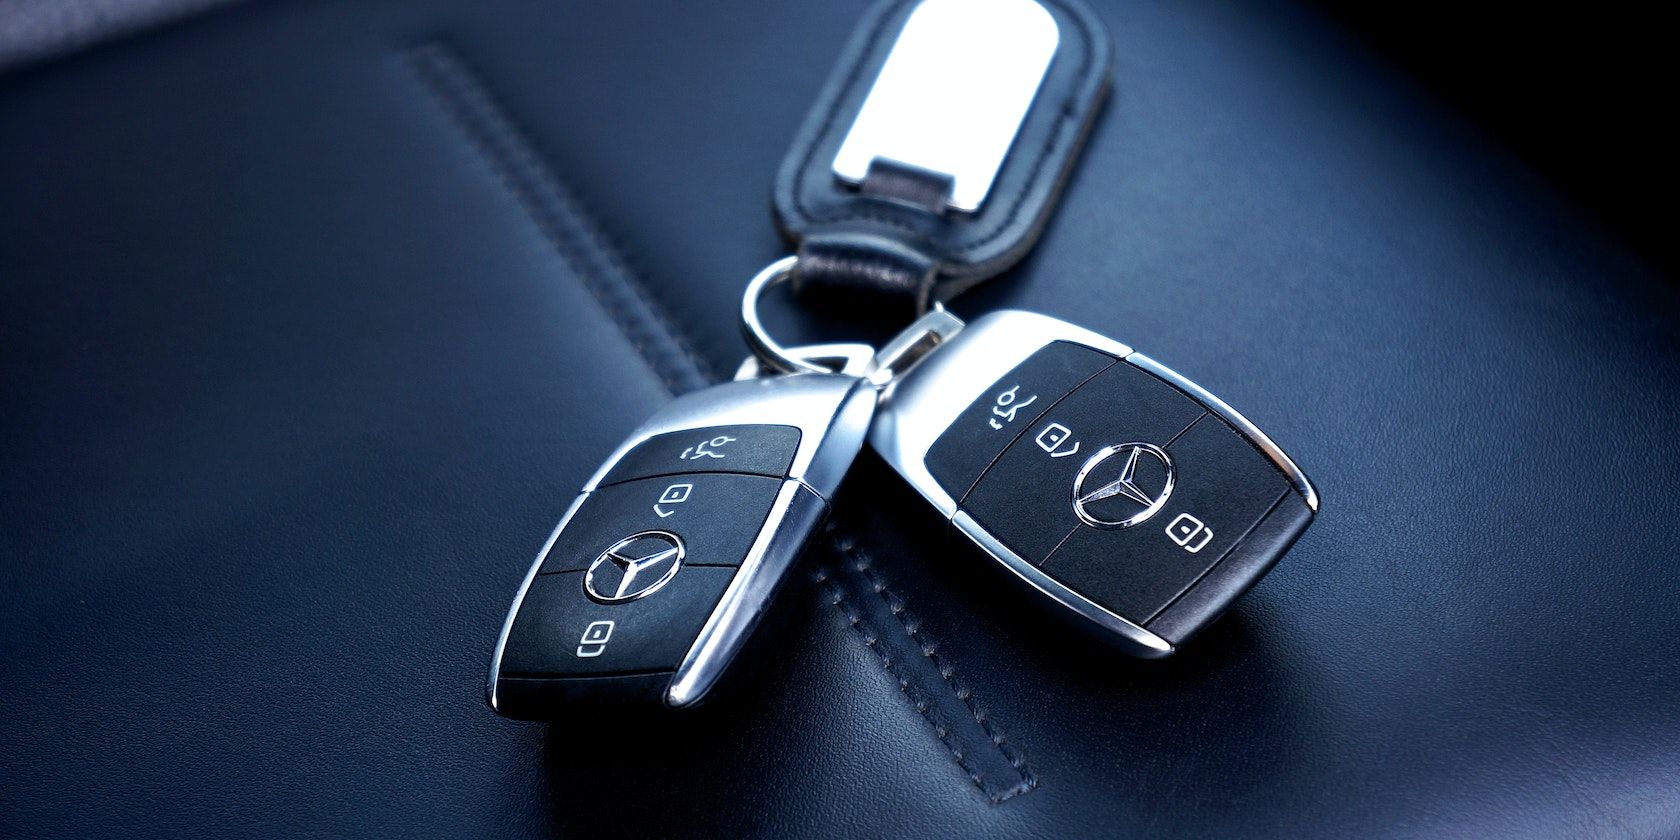 What Is Android Digital Car Key and How Does It Work?